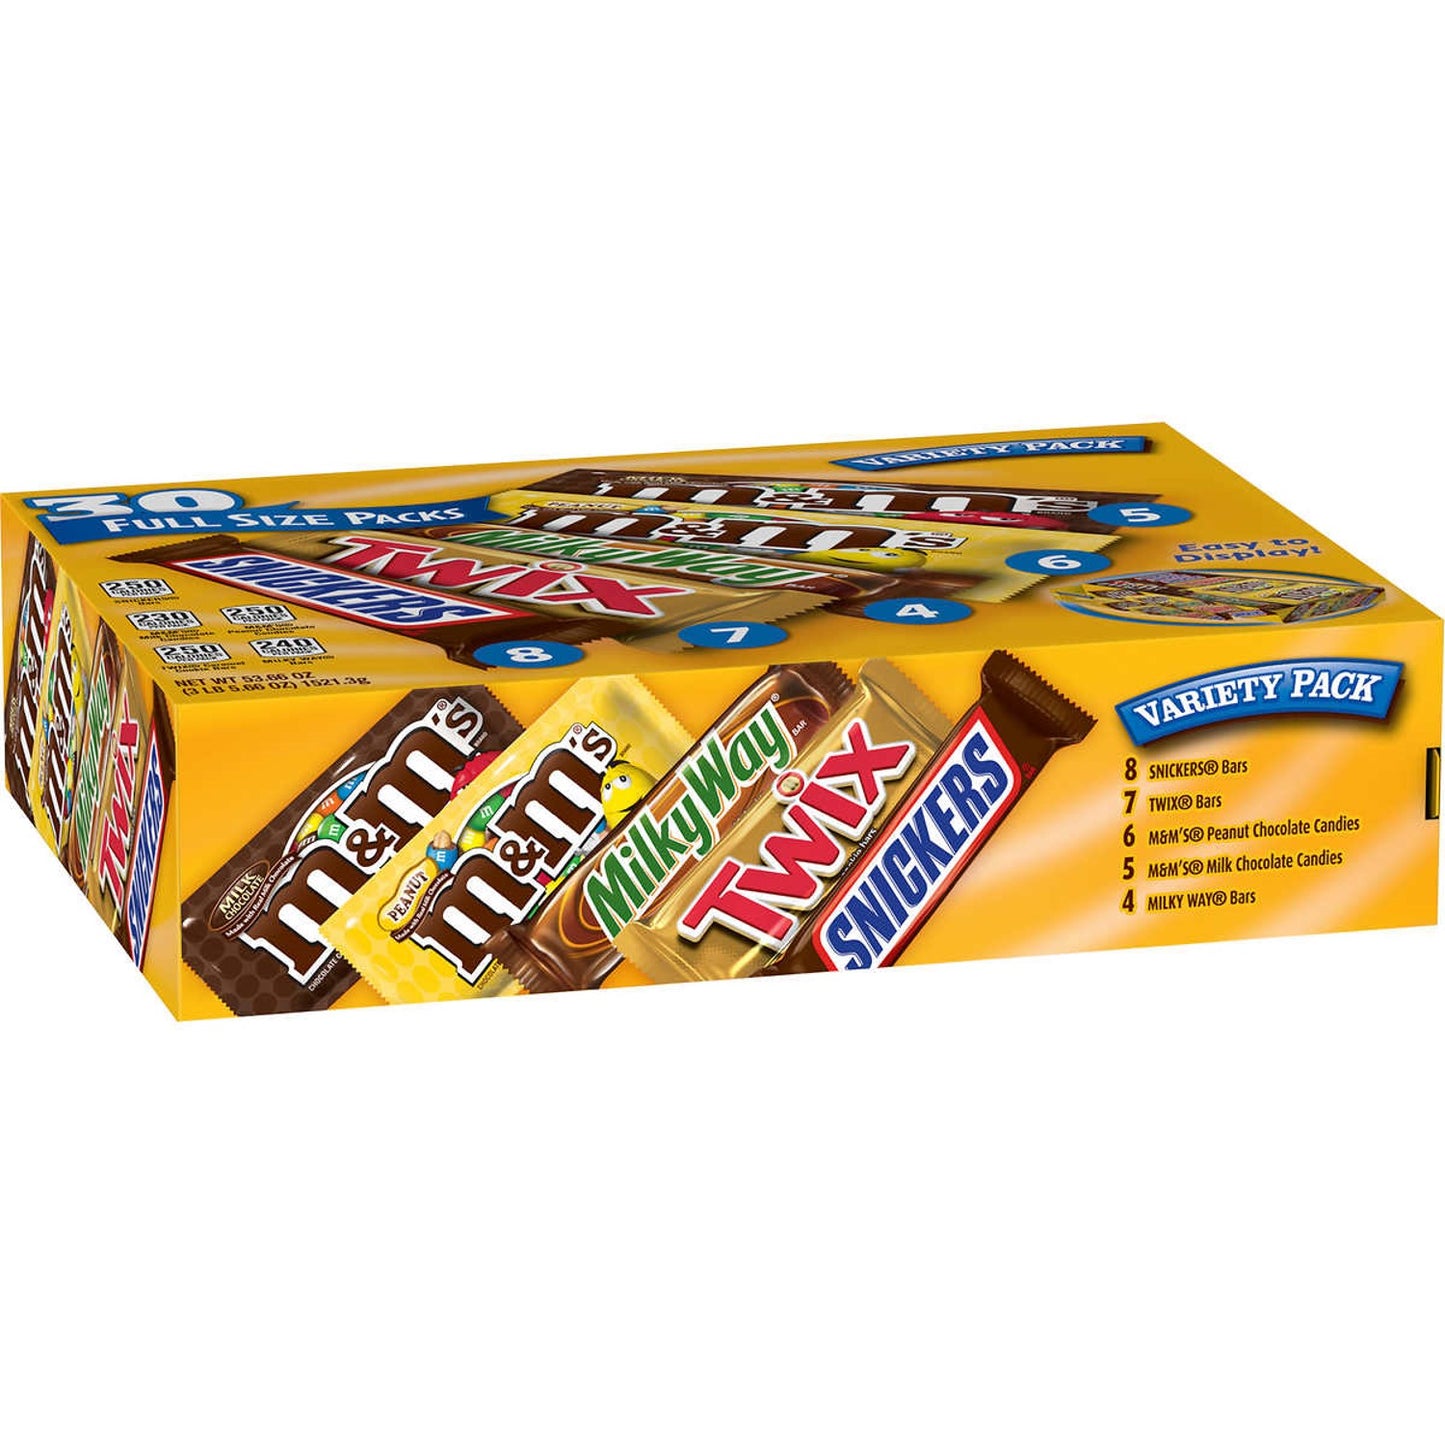 Mars Candy Chocolates Variety Full Size Snickers M&M's Twix Milky Way - 30 Pack